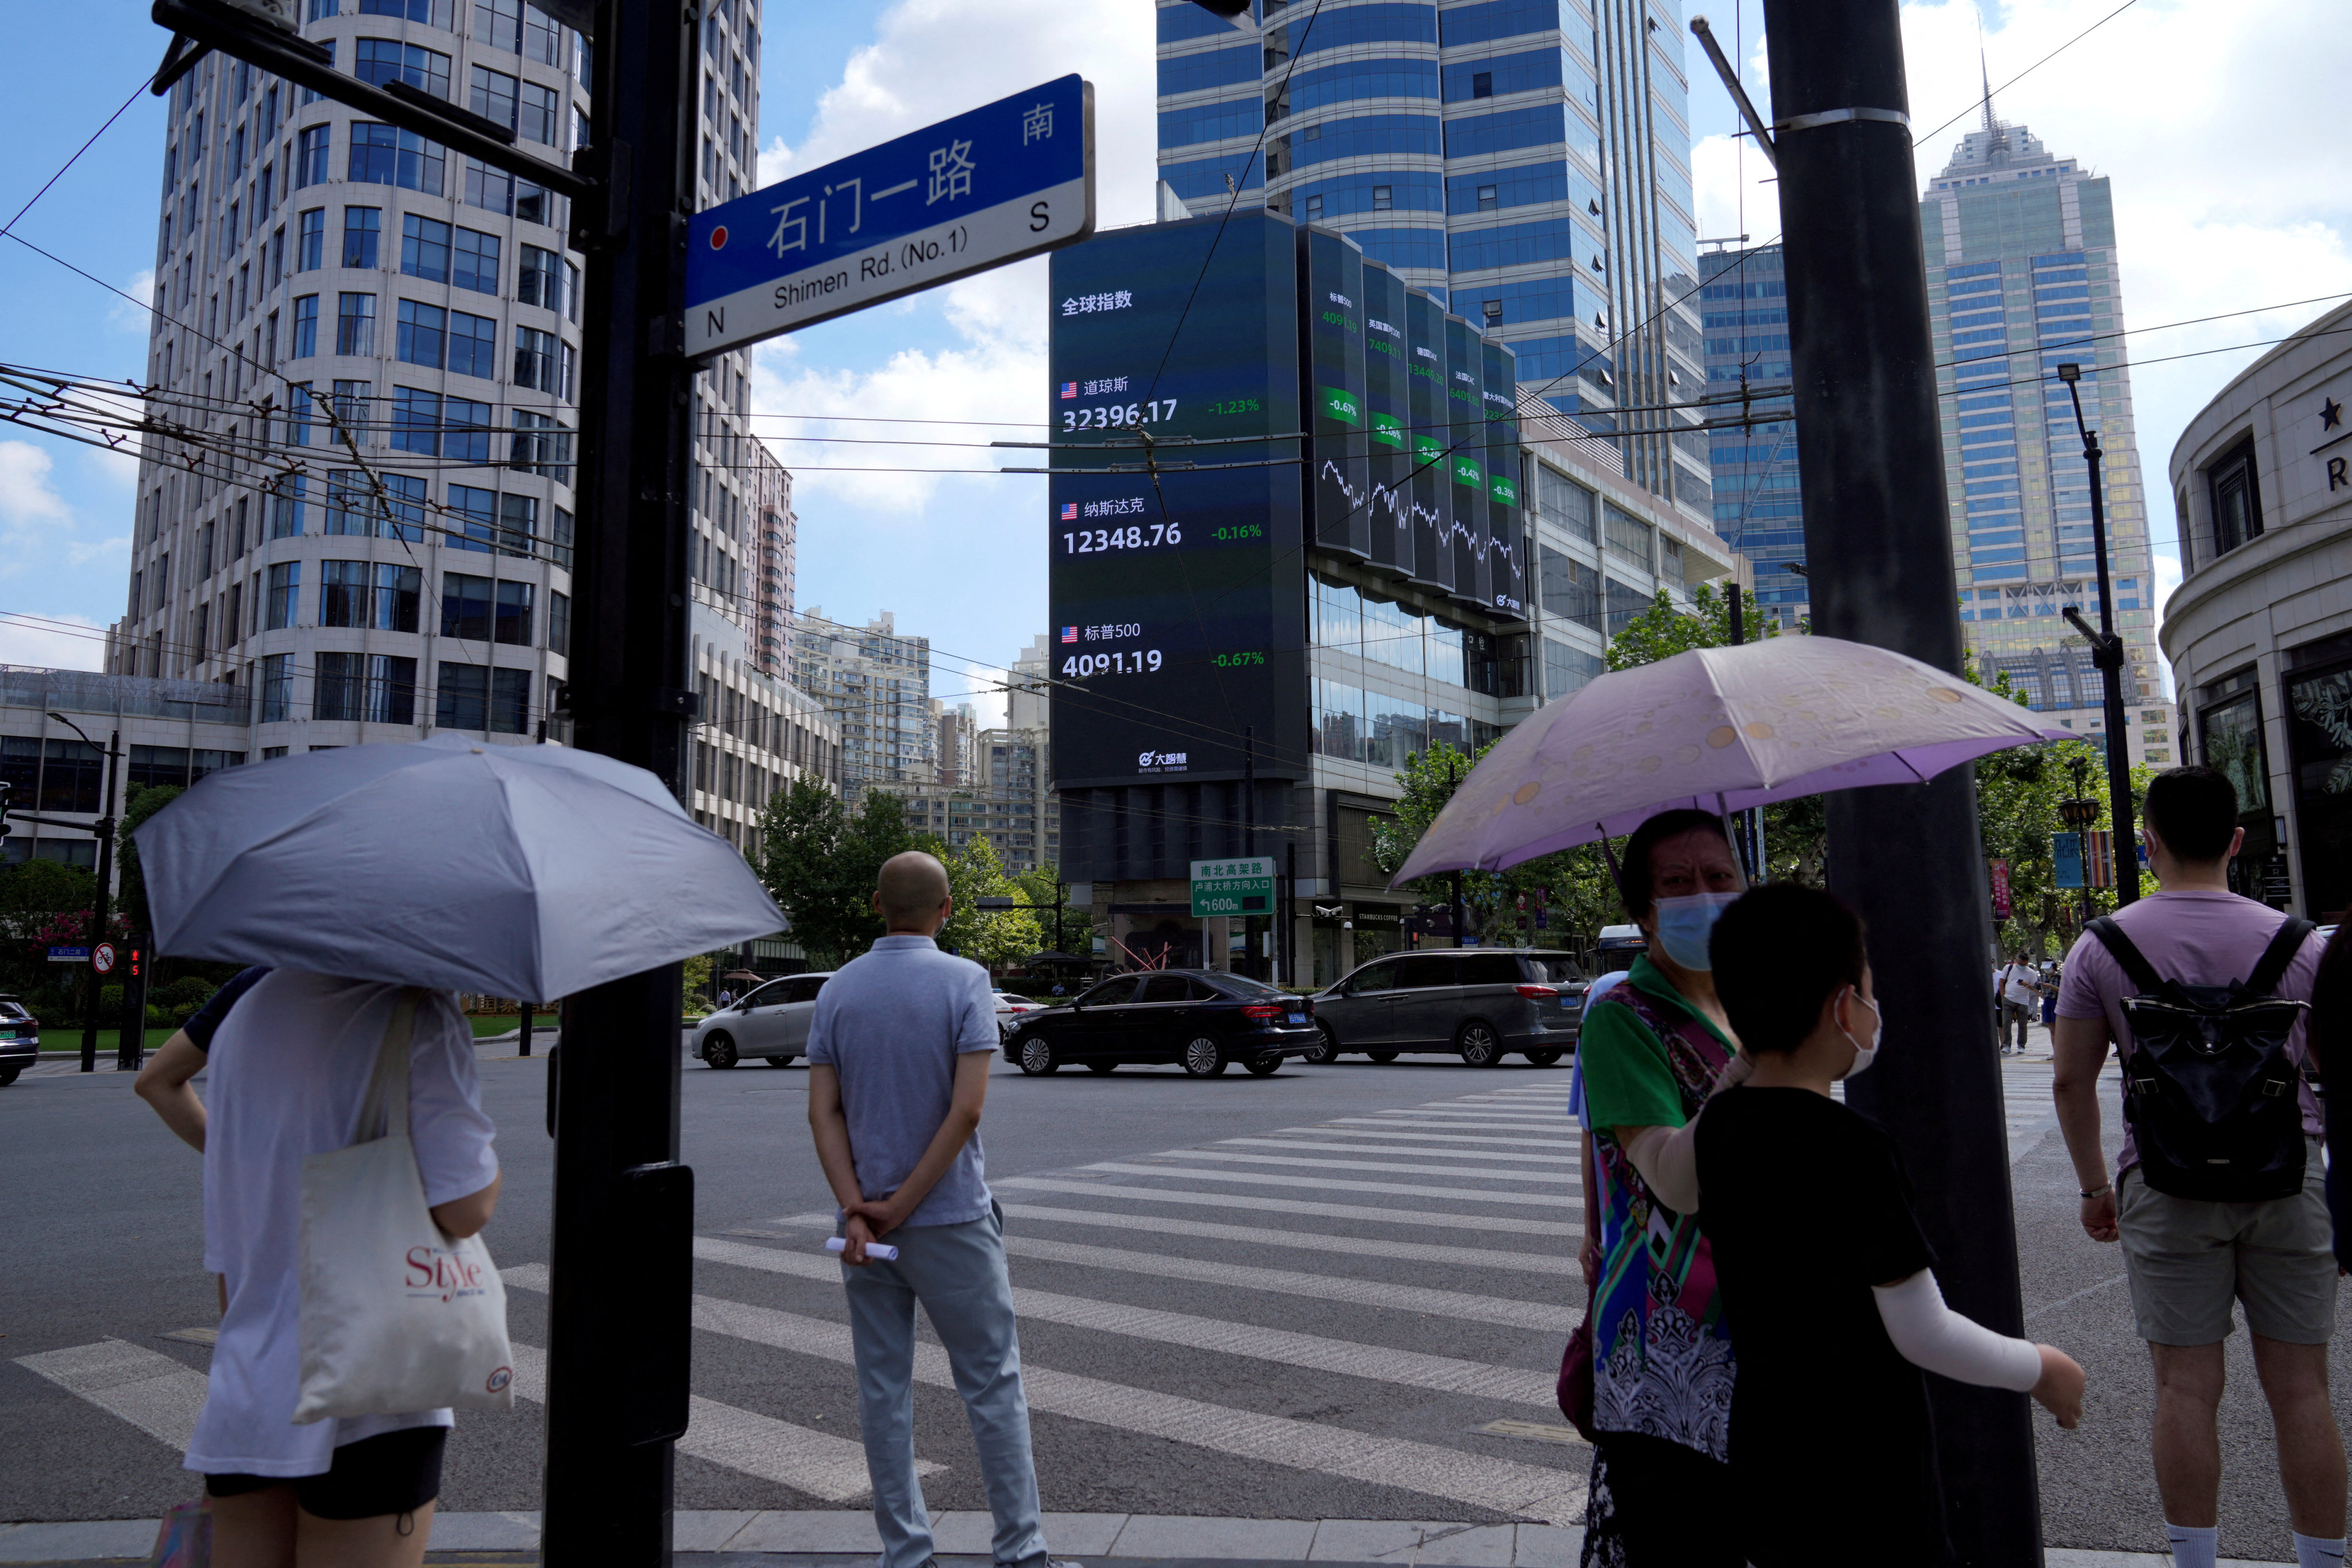 A giant screen displays stock indexes in Shanghai. Photo: Reuters